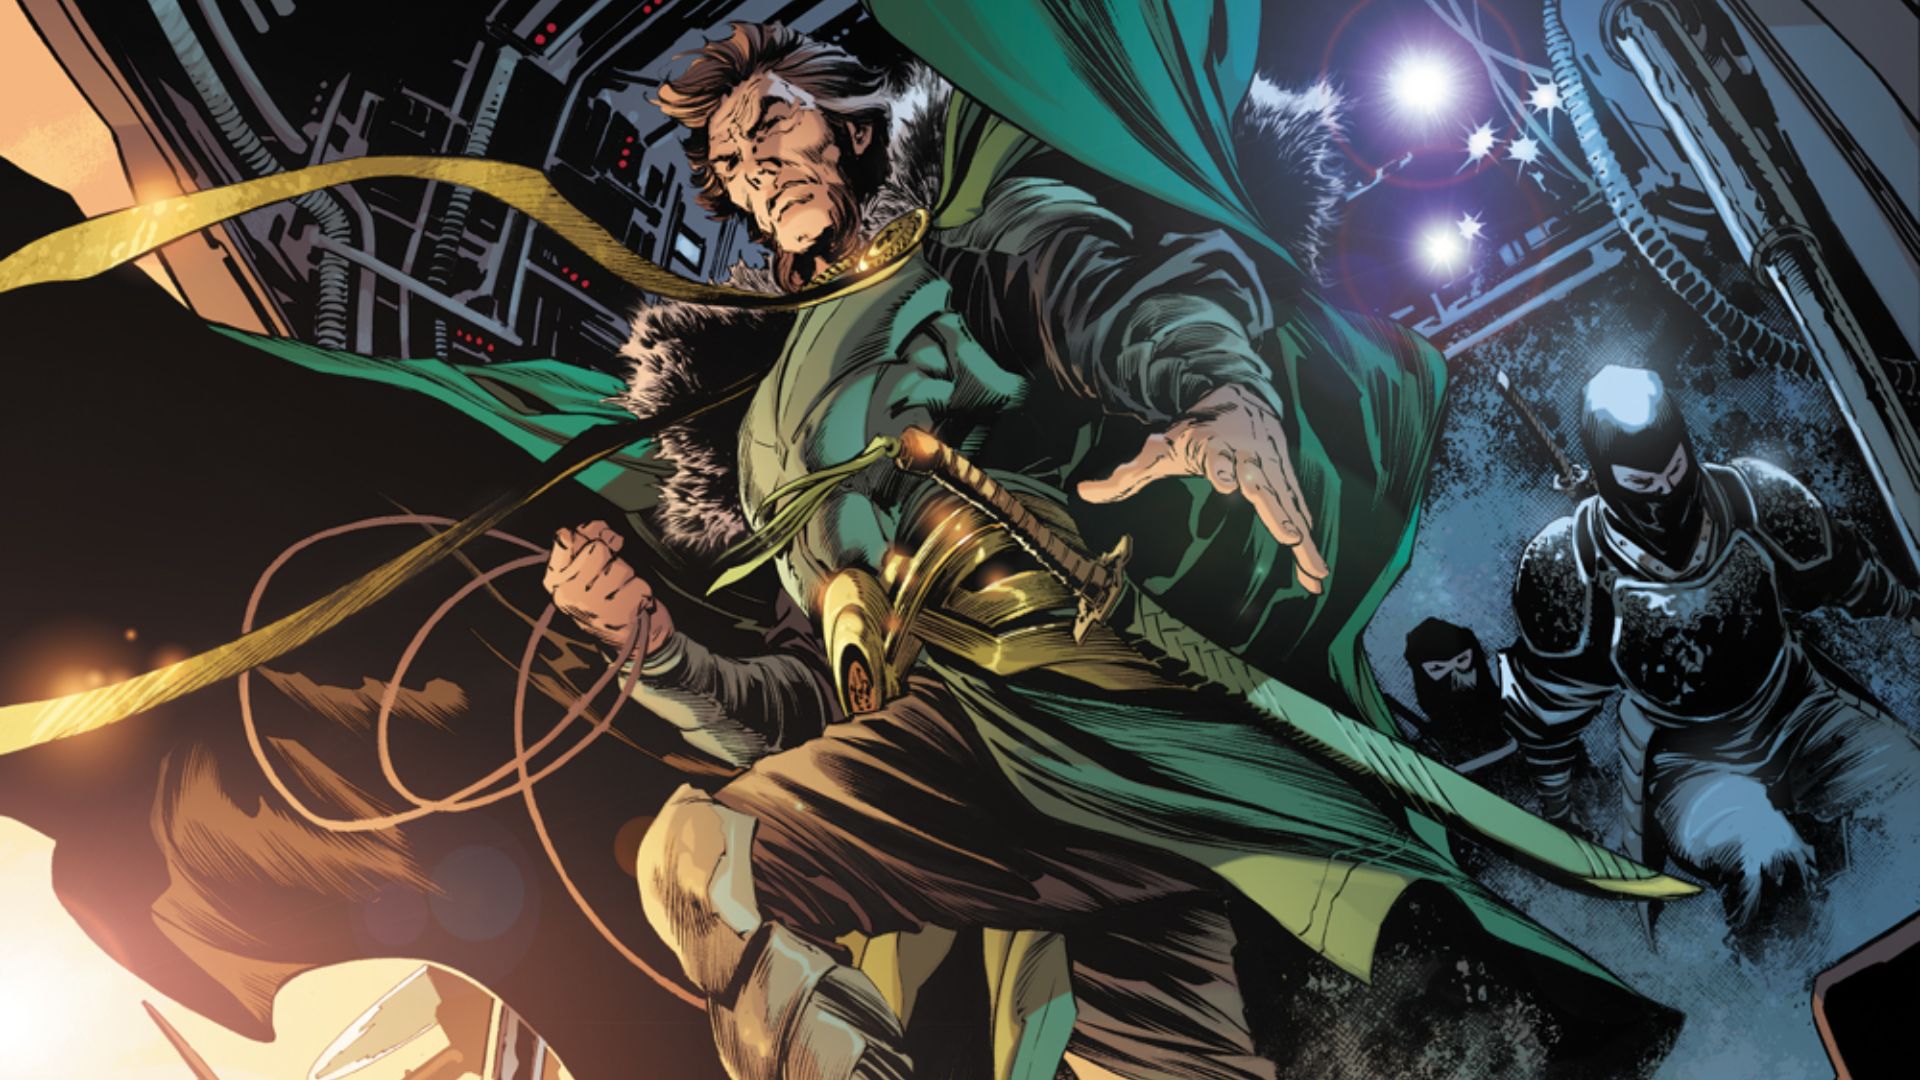  First look - the most epic Ra's al Ghul special wraps up the Batman - One Bad Day event 